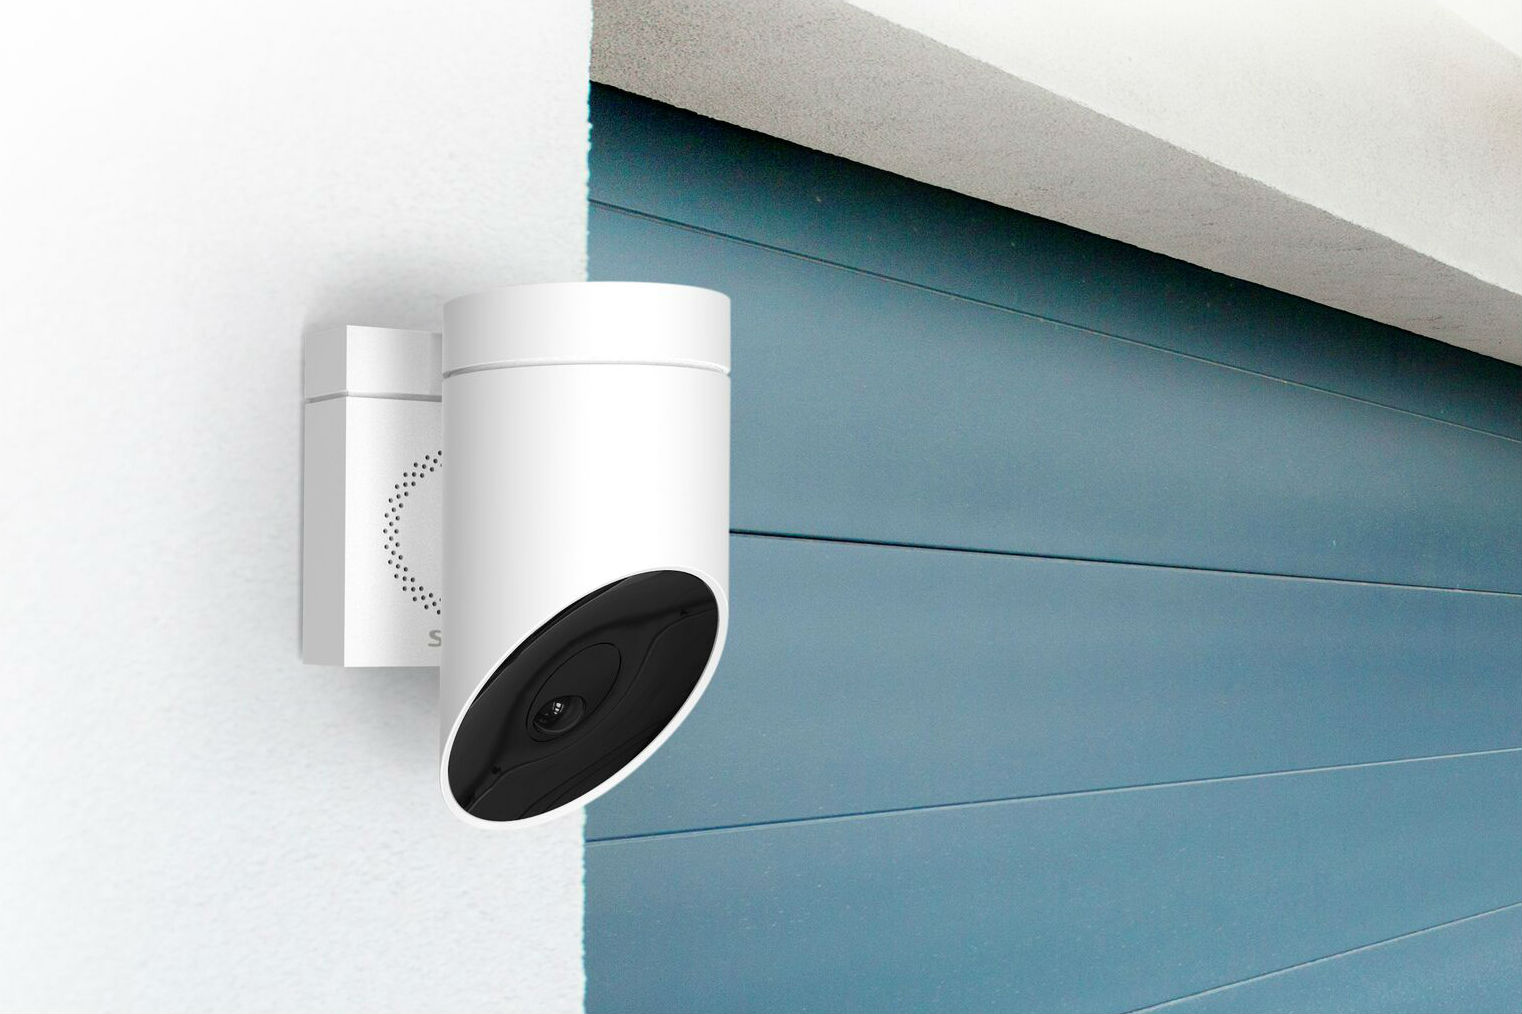 Somfy One steps out from smart shades to tackle home security at